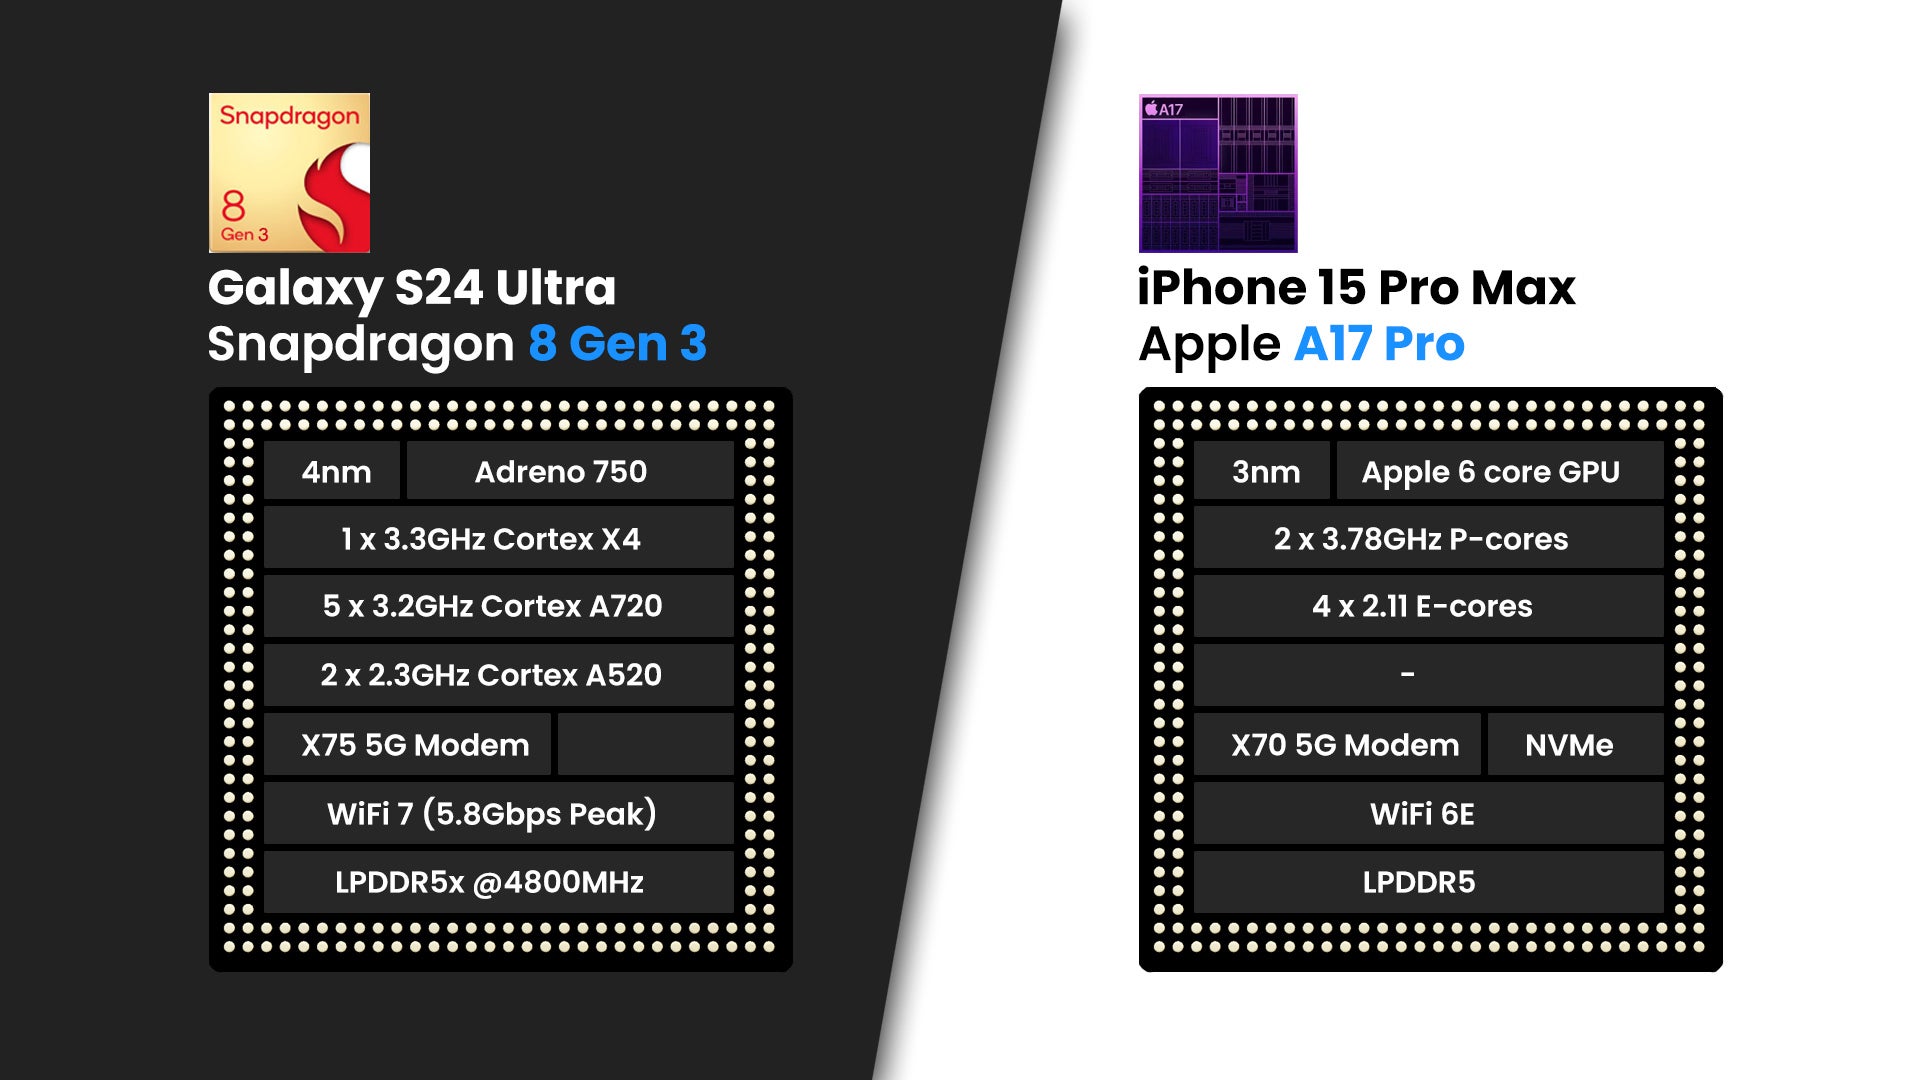 Snapdragon 8 Gen 3 vs A17 Pro preliminary specs image by PhoneArena - Samsung Galaxy S24 Ultra vs iPhone 15 Pro Max: The Battle of Titans